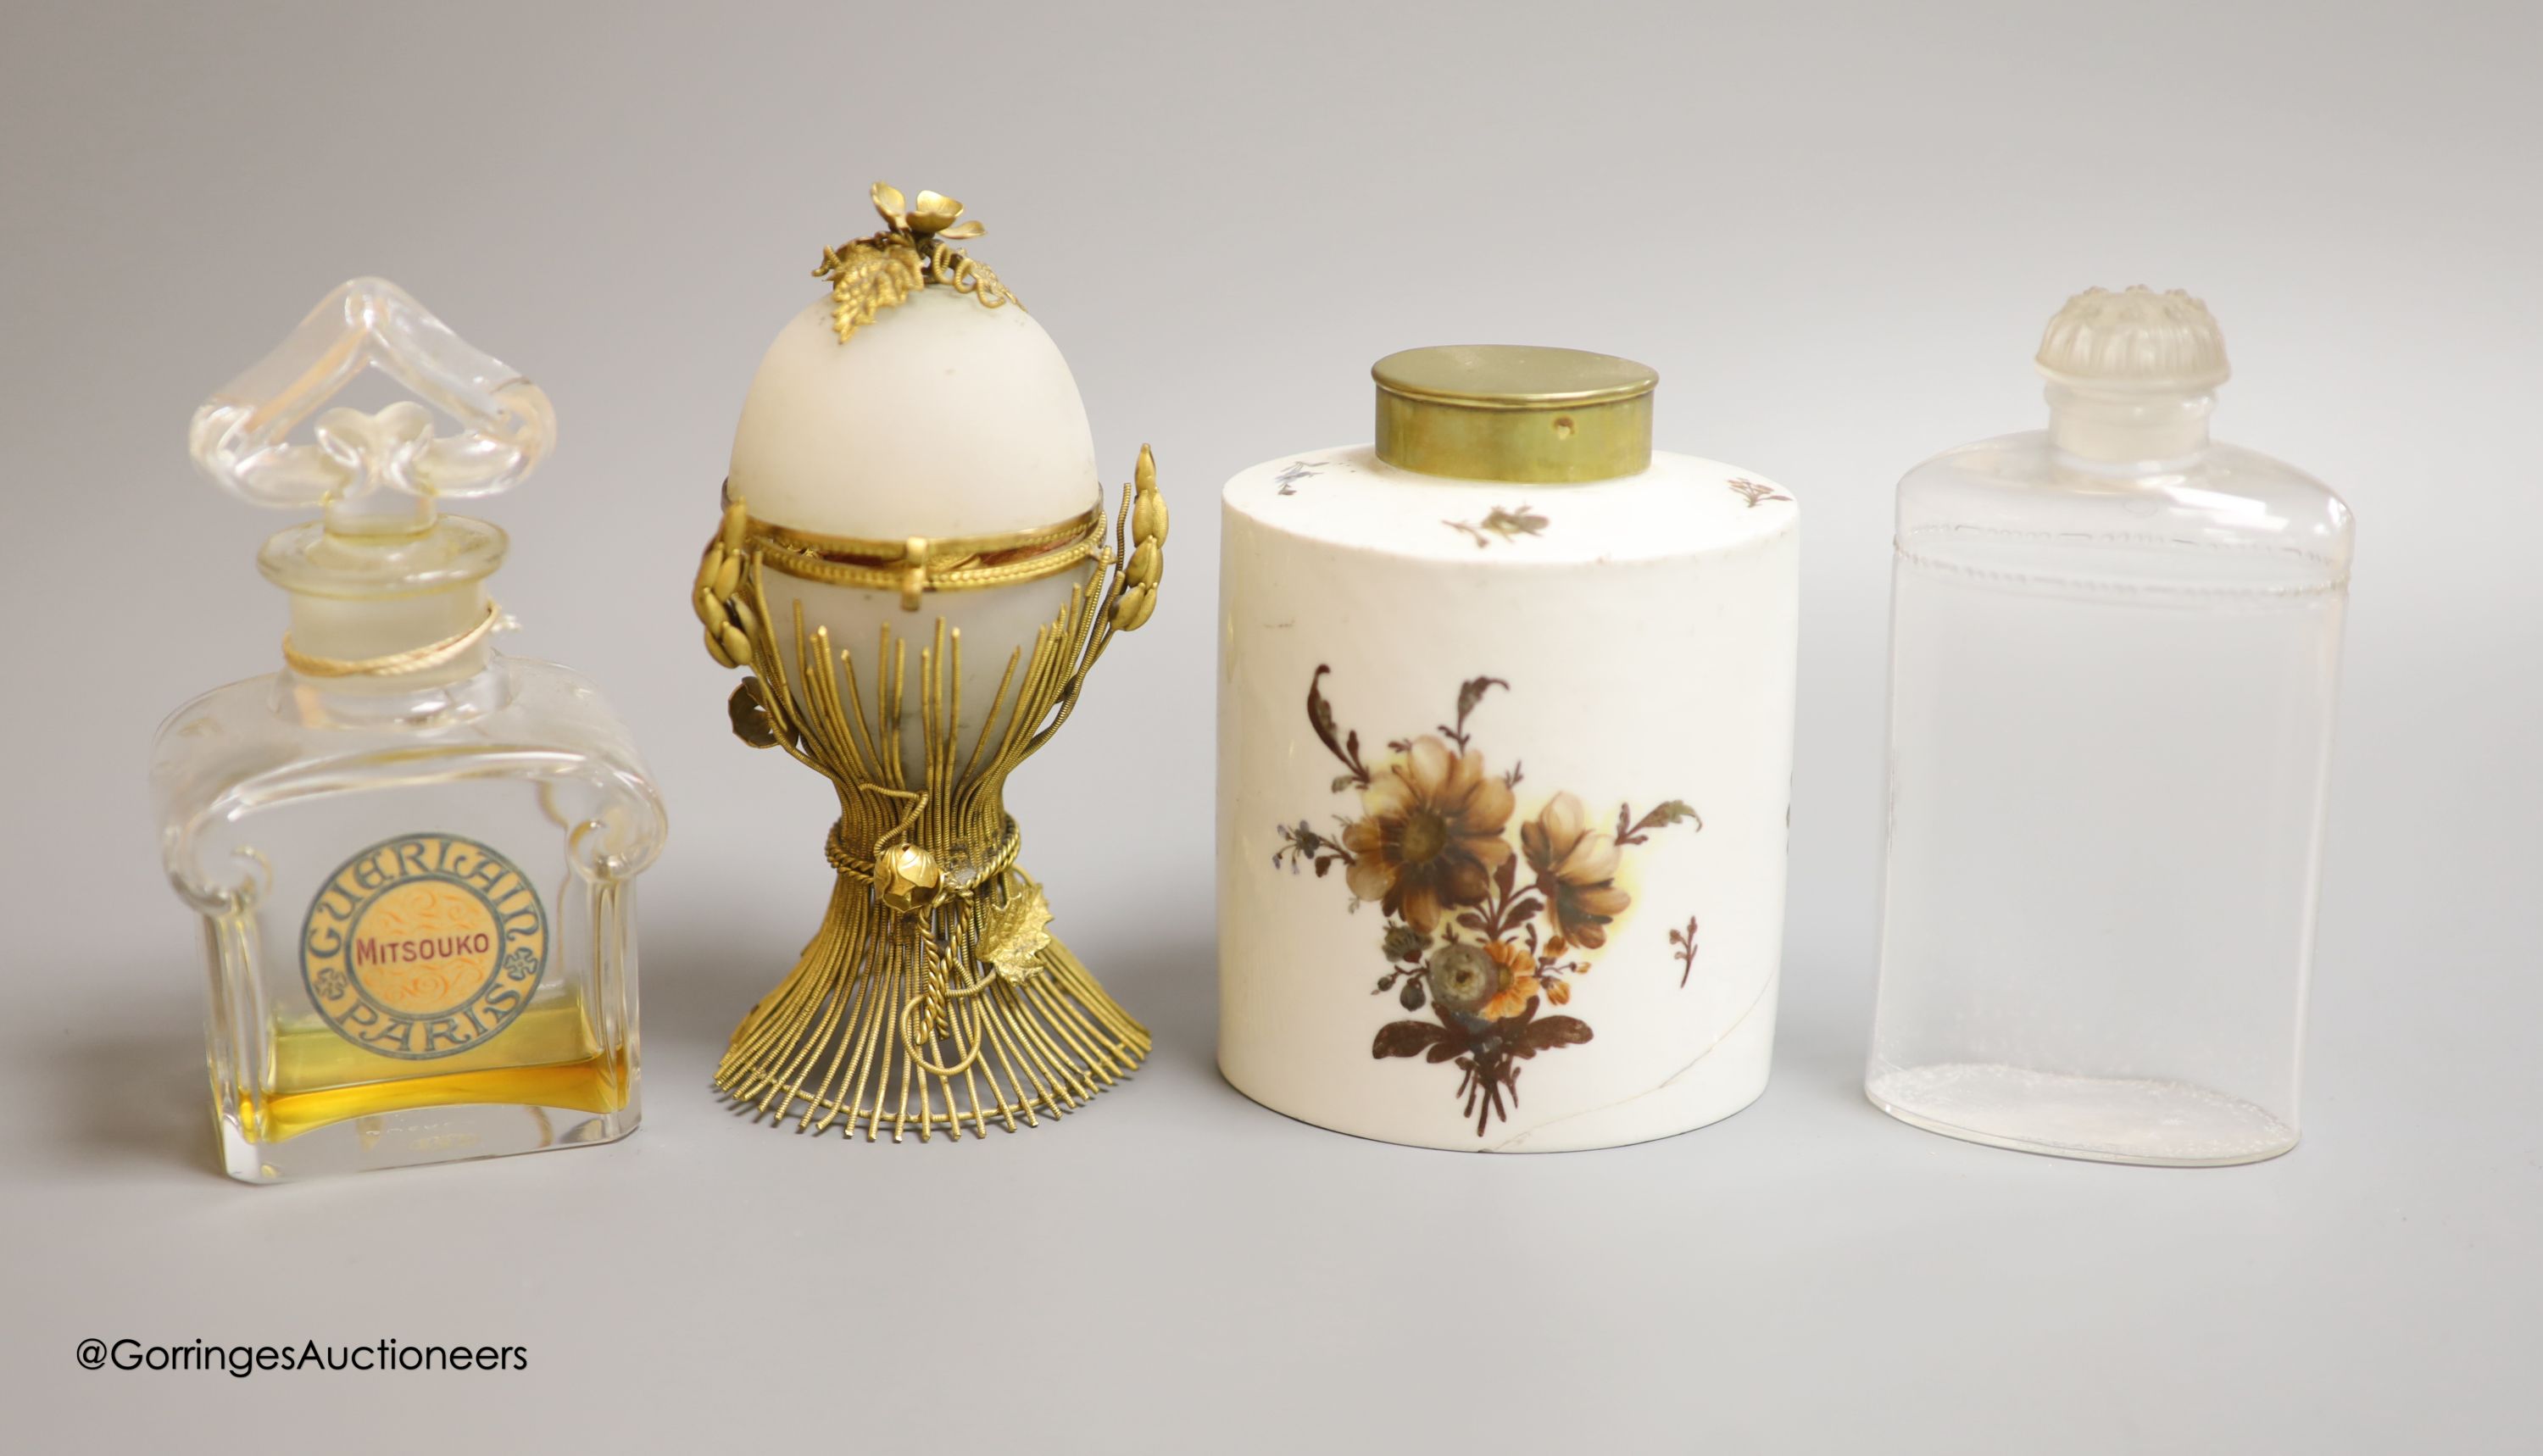 A gilt metal necessaire, a ceramic continental perfume bottle and a Guerlain and Coty perfume bottle